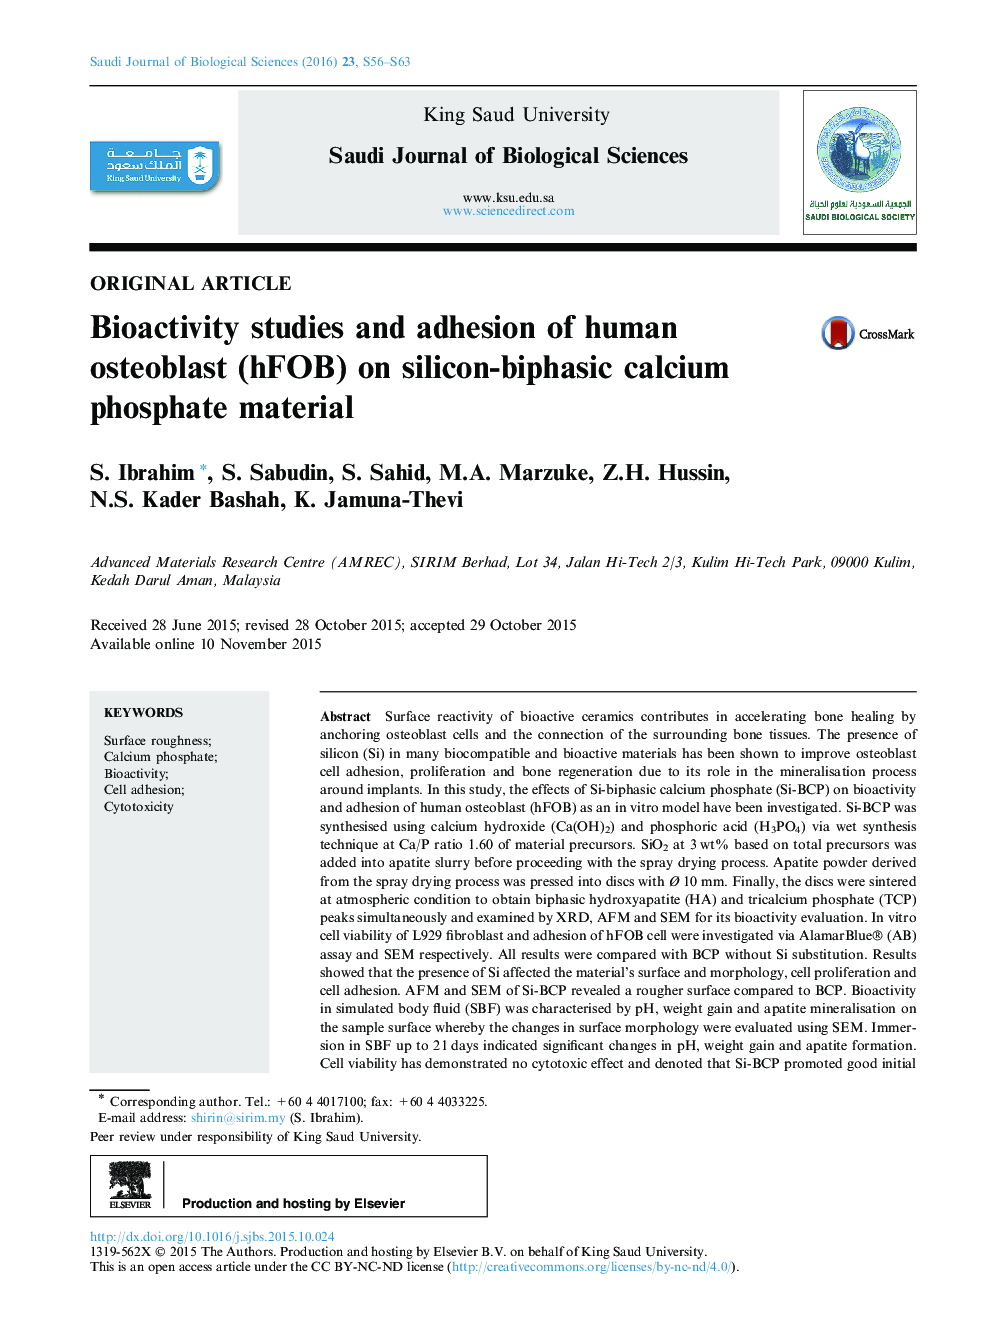 Bioactivity studies and adhesion of human osteoblast (hFOB) on silicon-biphasic calcium phosphate material